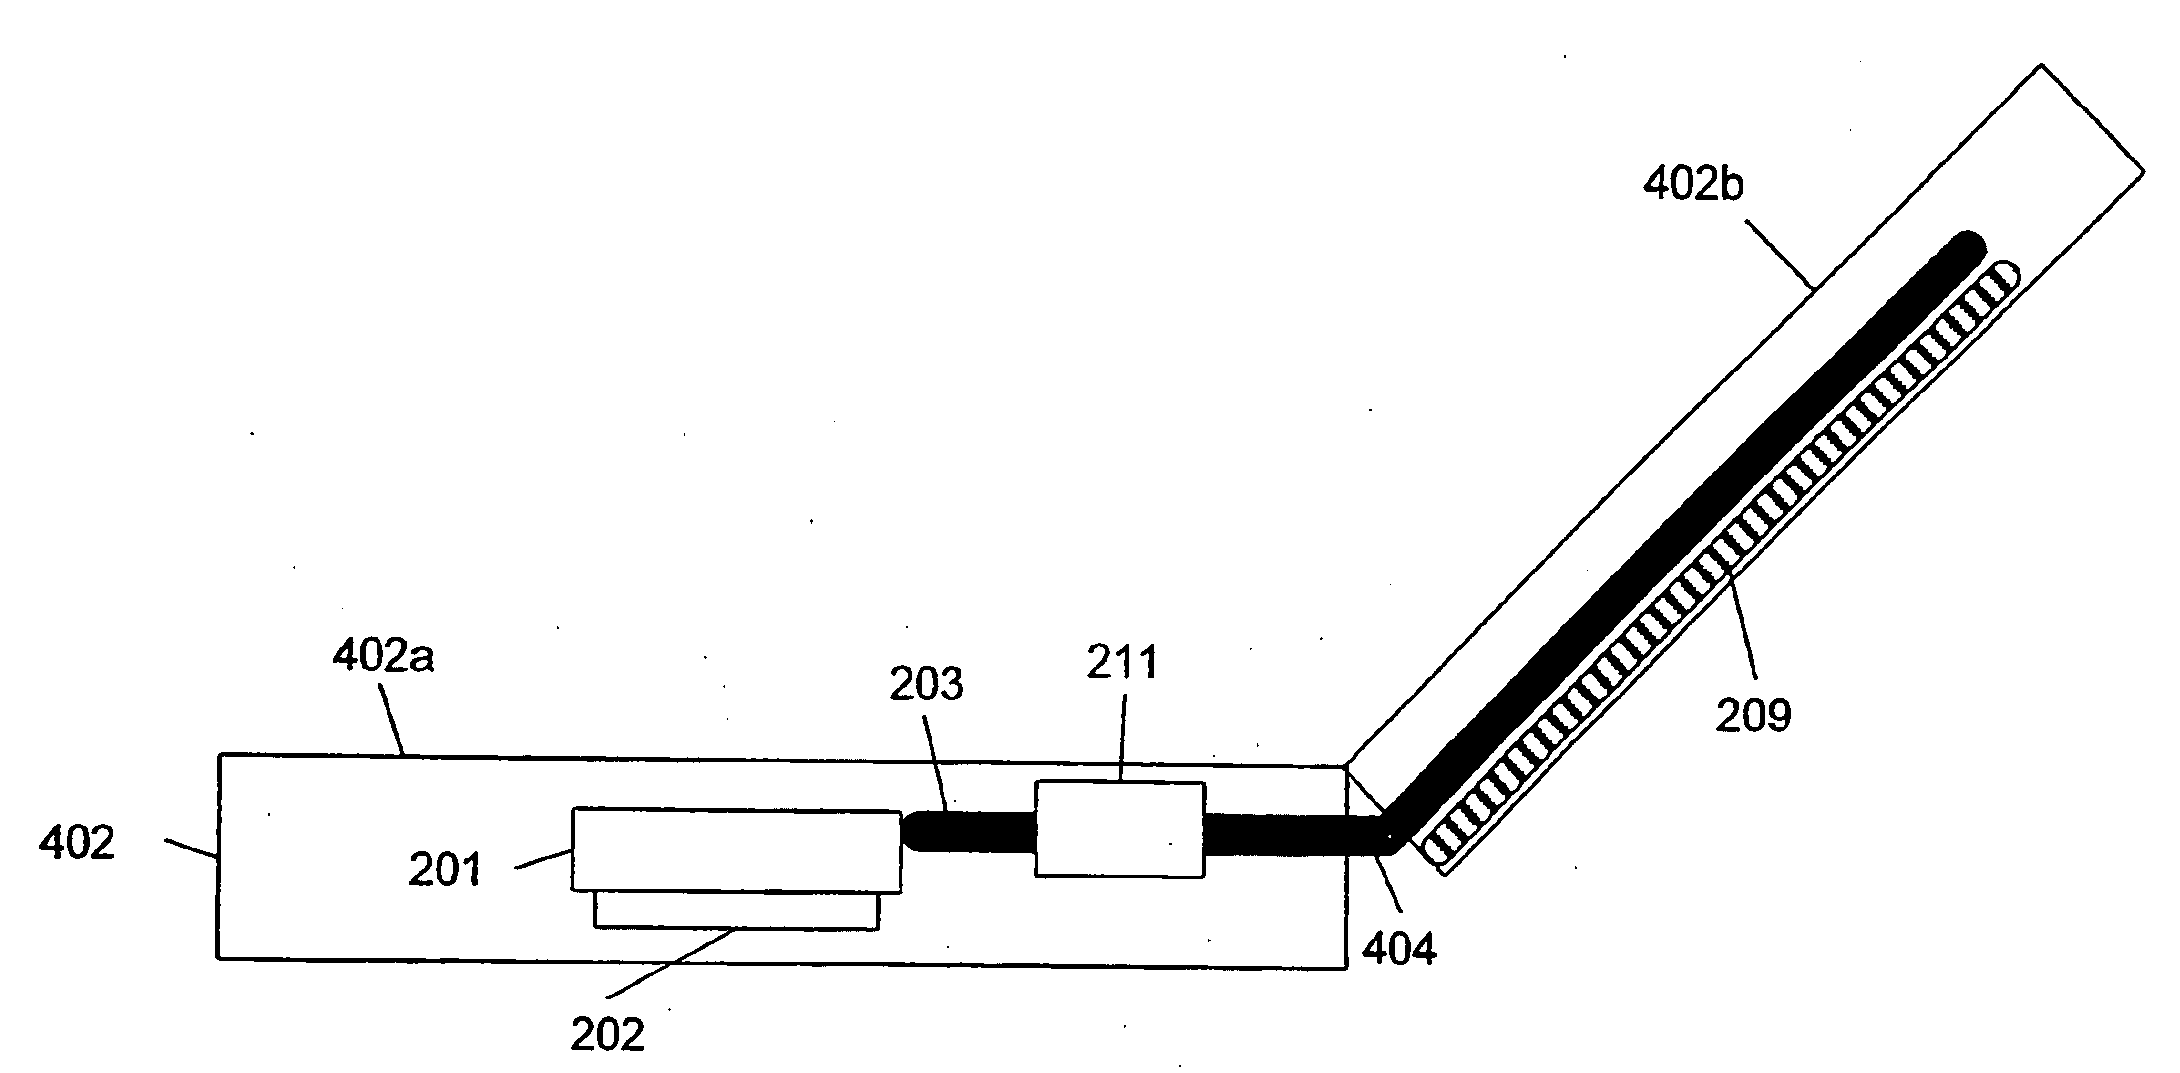 Cooling of High Power Density Devices Using Electrically Conducting Fluids